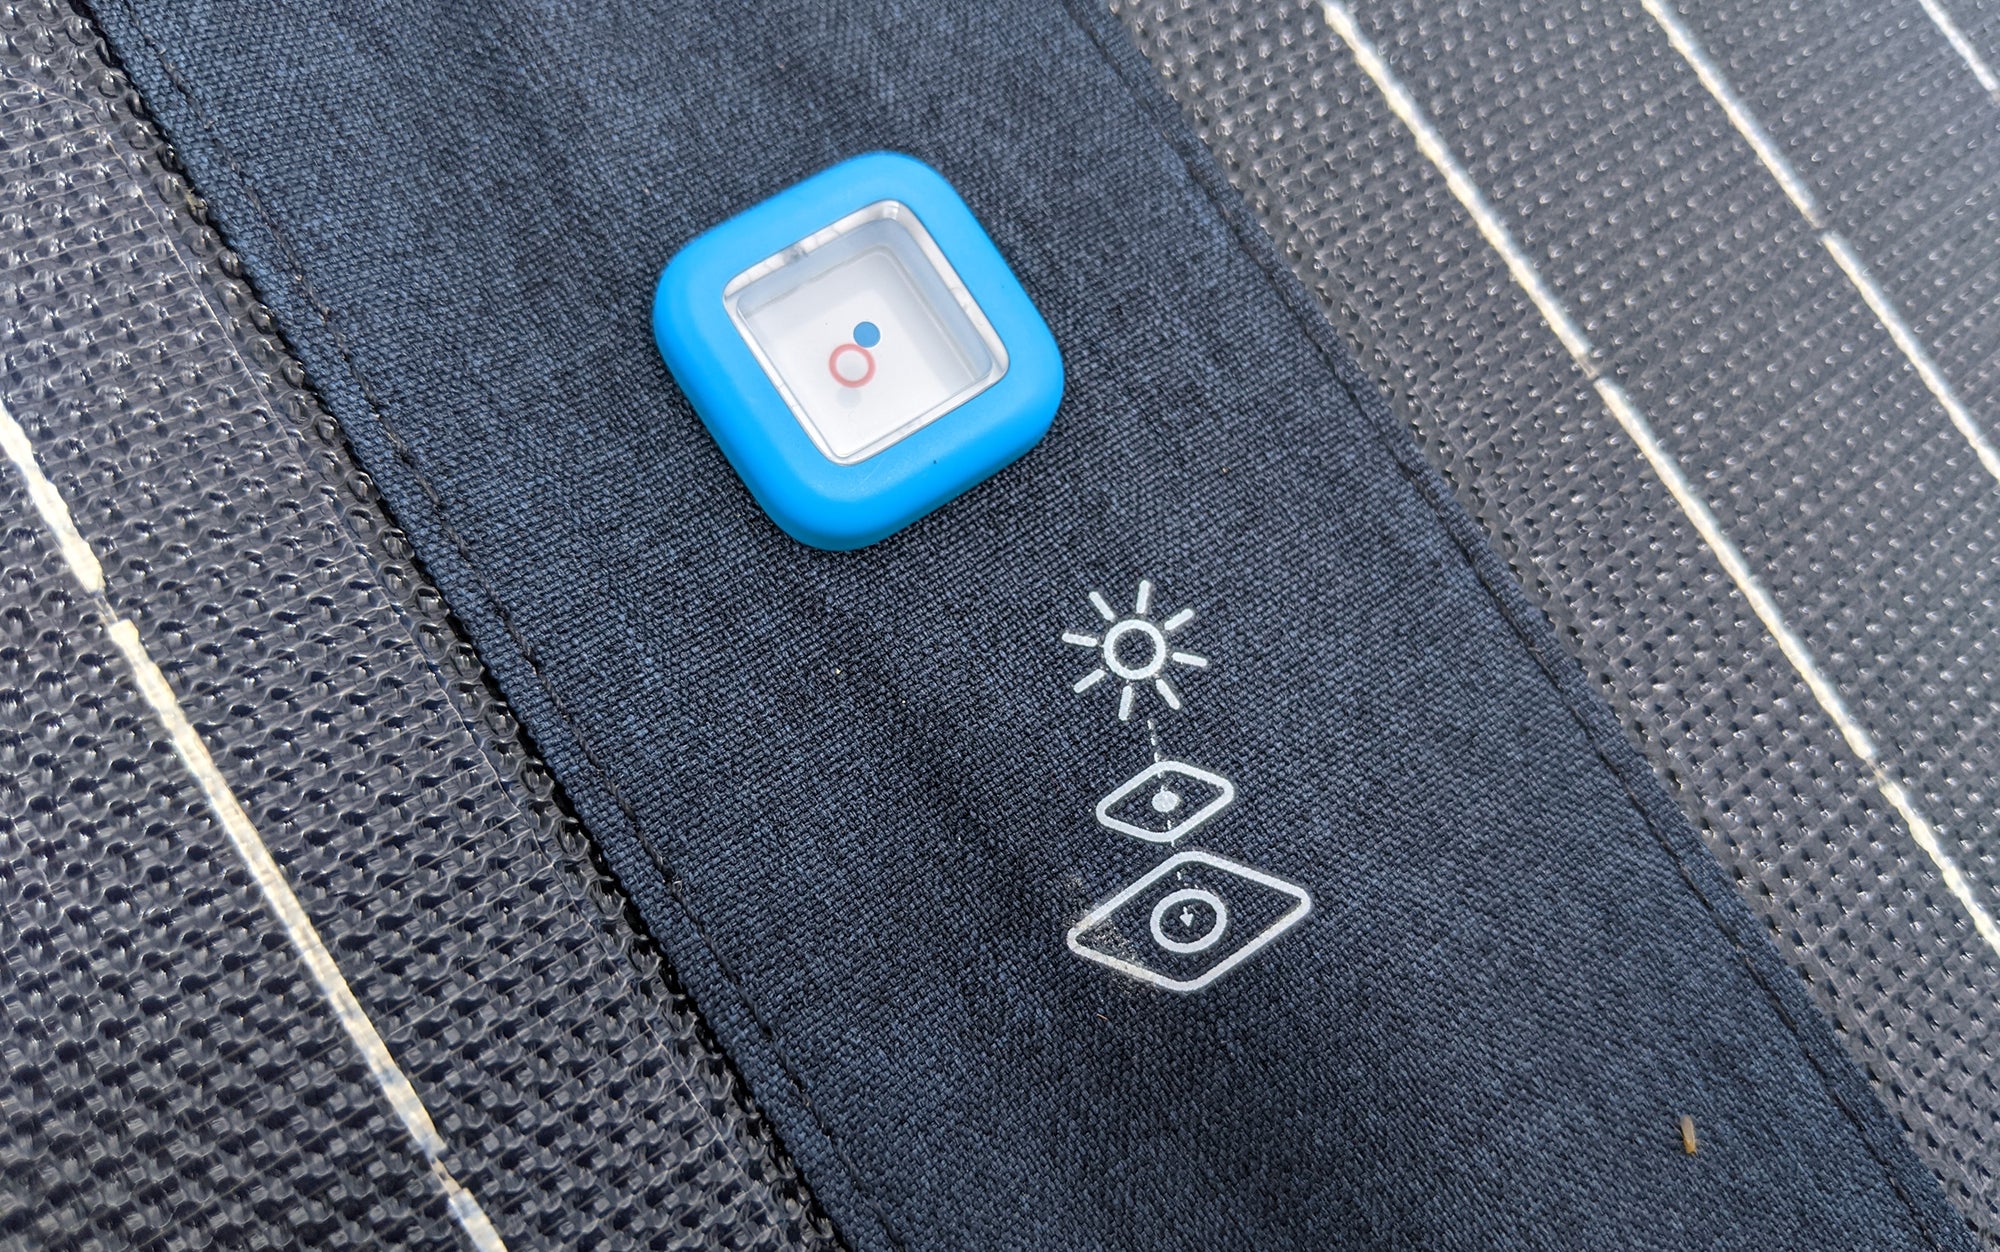 The sundial on the Anker 625 Solar Panel made it easy to ensure it was pointed in the right direction. 